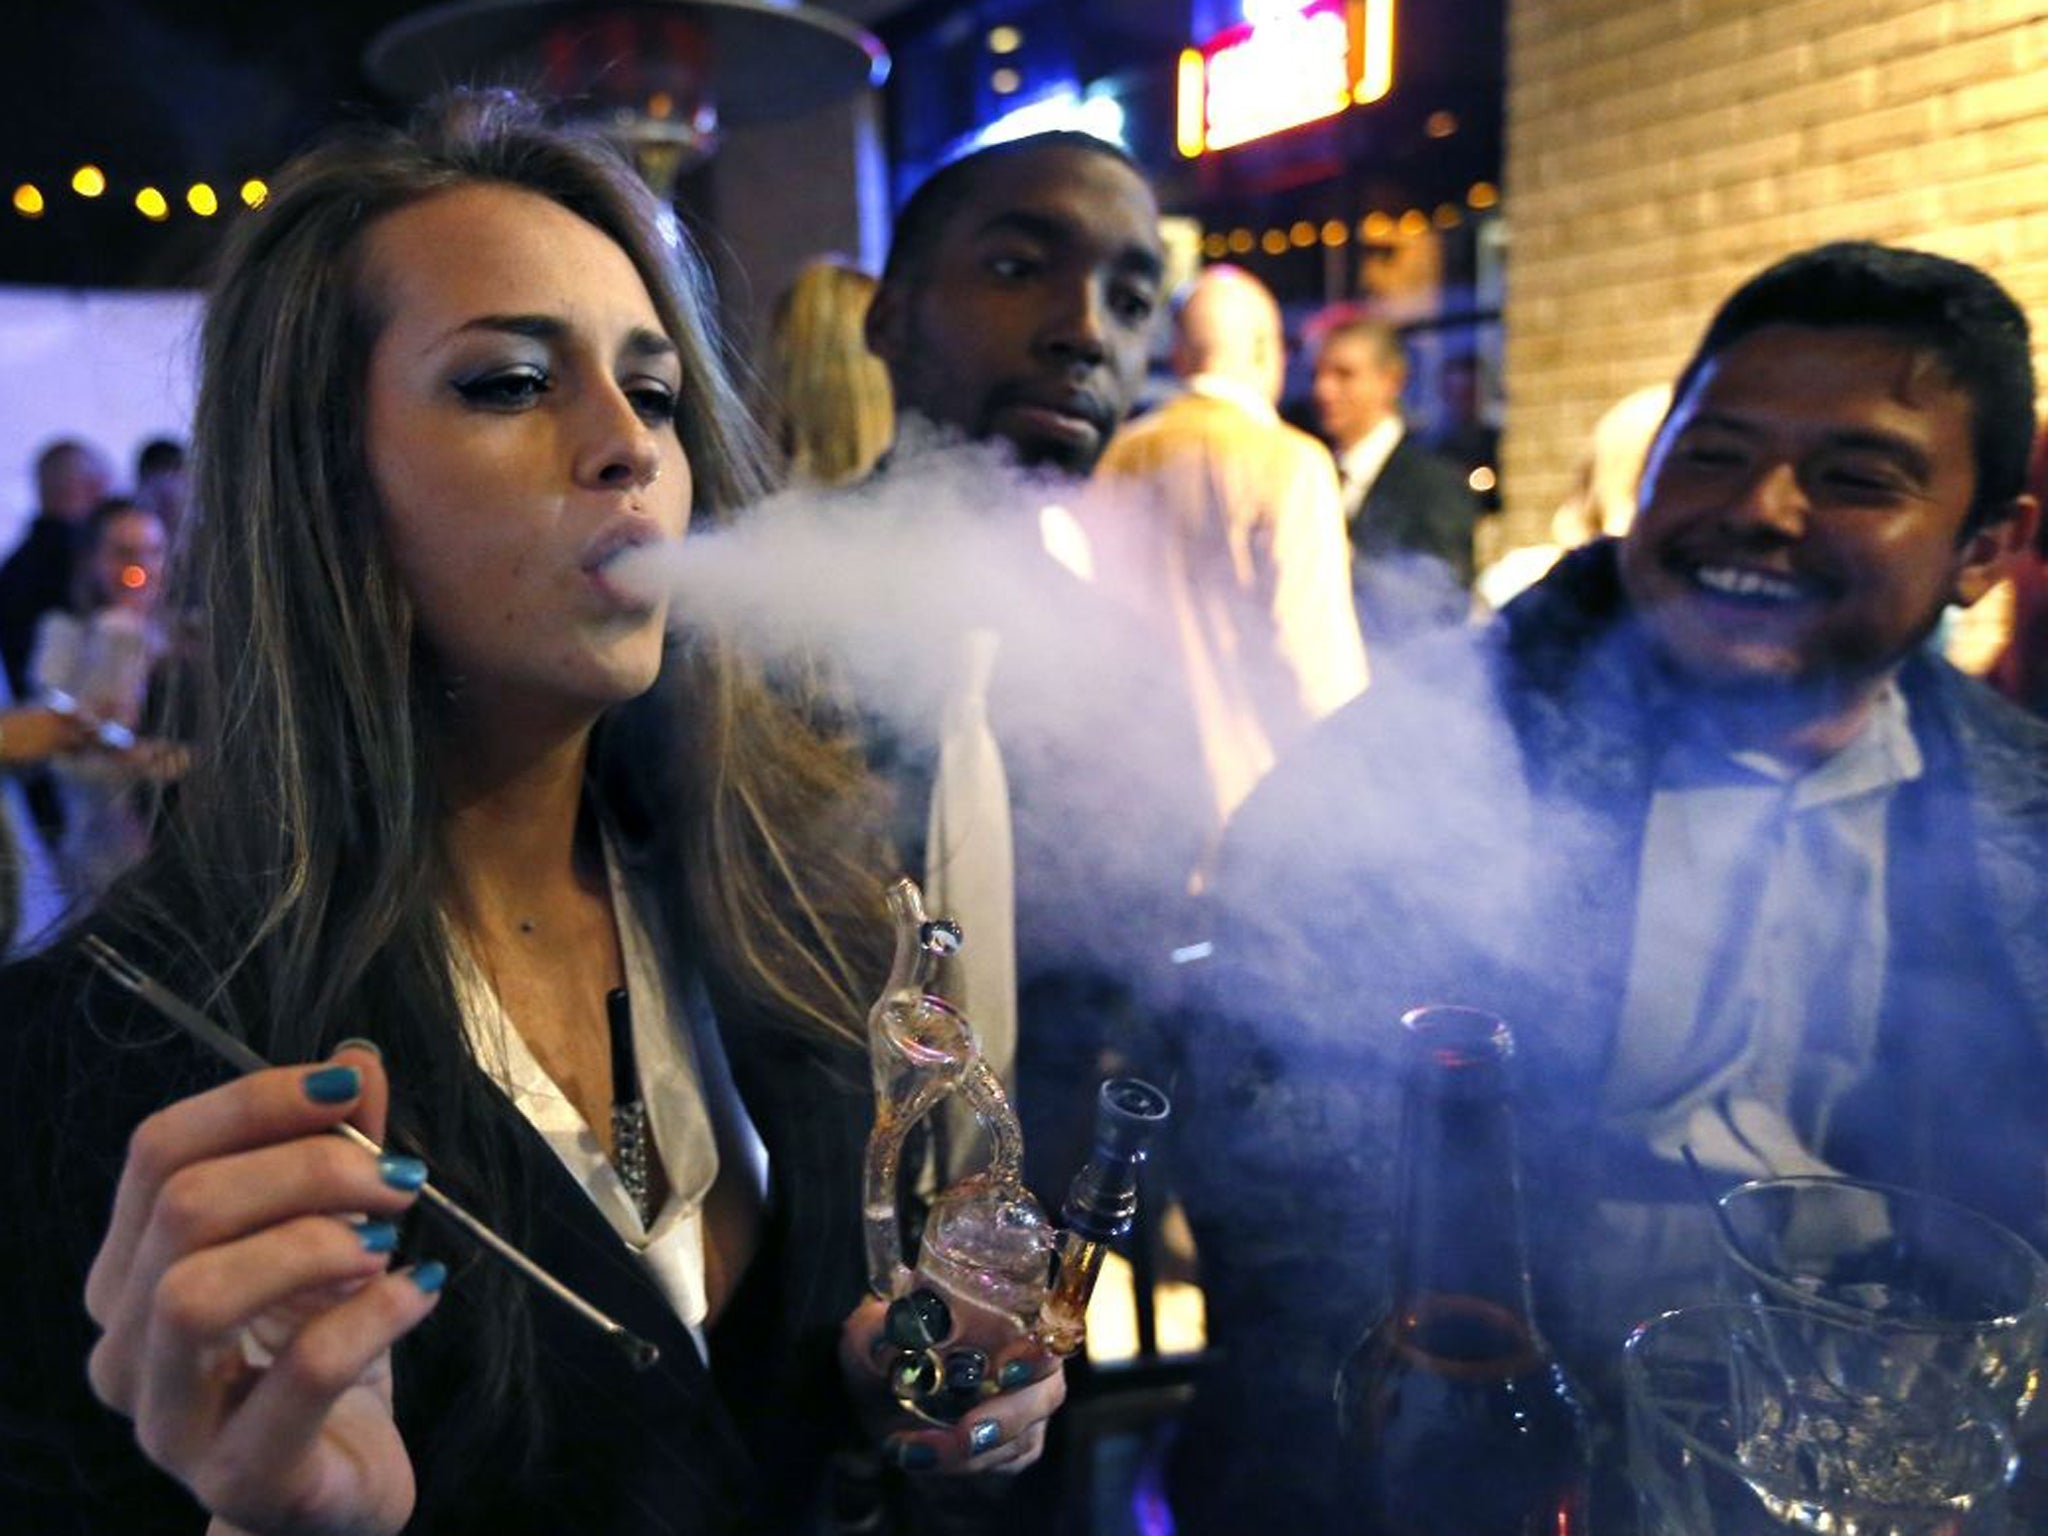 Partygoers smoke marijuana during a Prohibition-era themed New Year's Eve party celebrating the start of retail cannabis sales